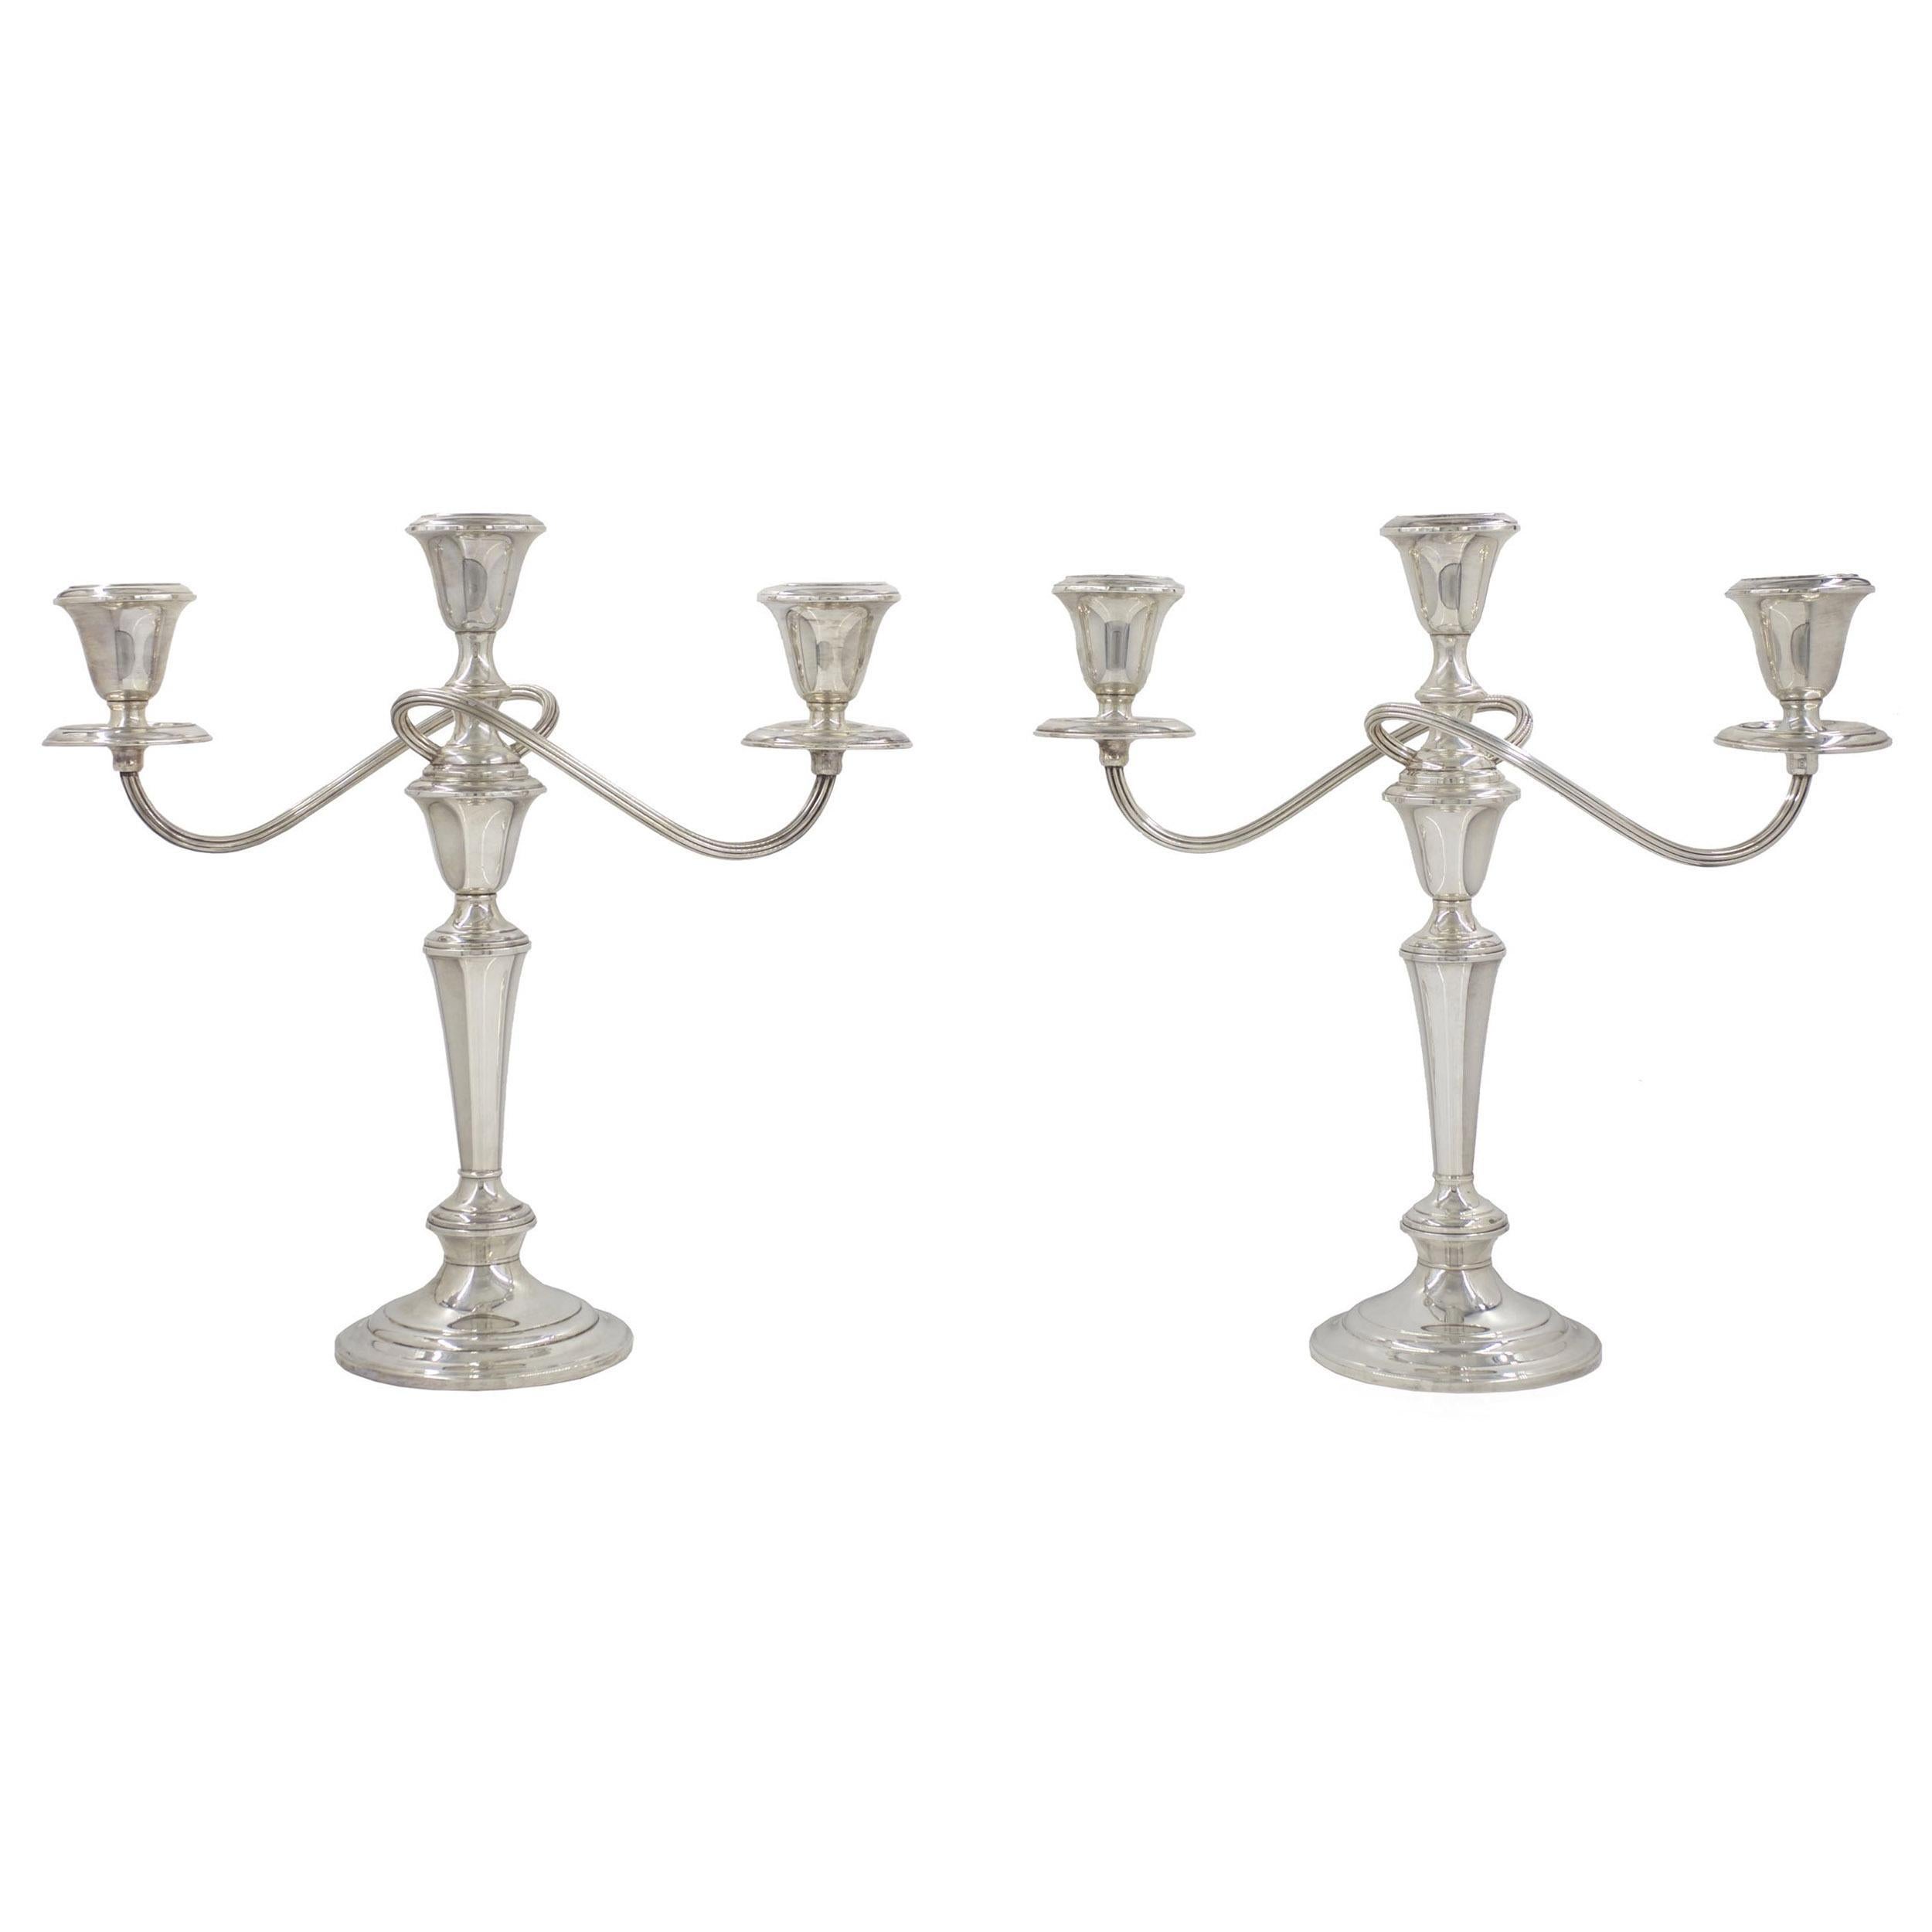 An exquisite pair of vintage weighted sterling silver candelabra from the iconic American firm Gorham Co., they feature a stunning swirled-and-reeded stem that completely wraps around the central candlewell. They are convertible into simple